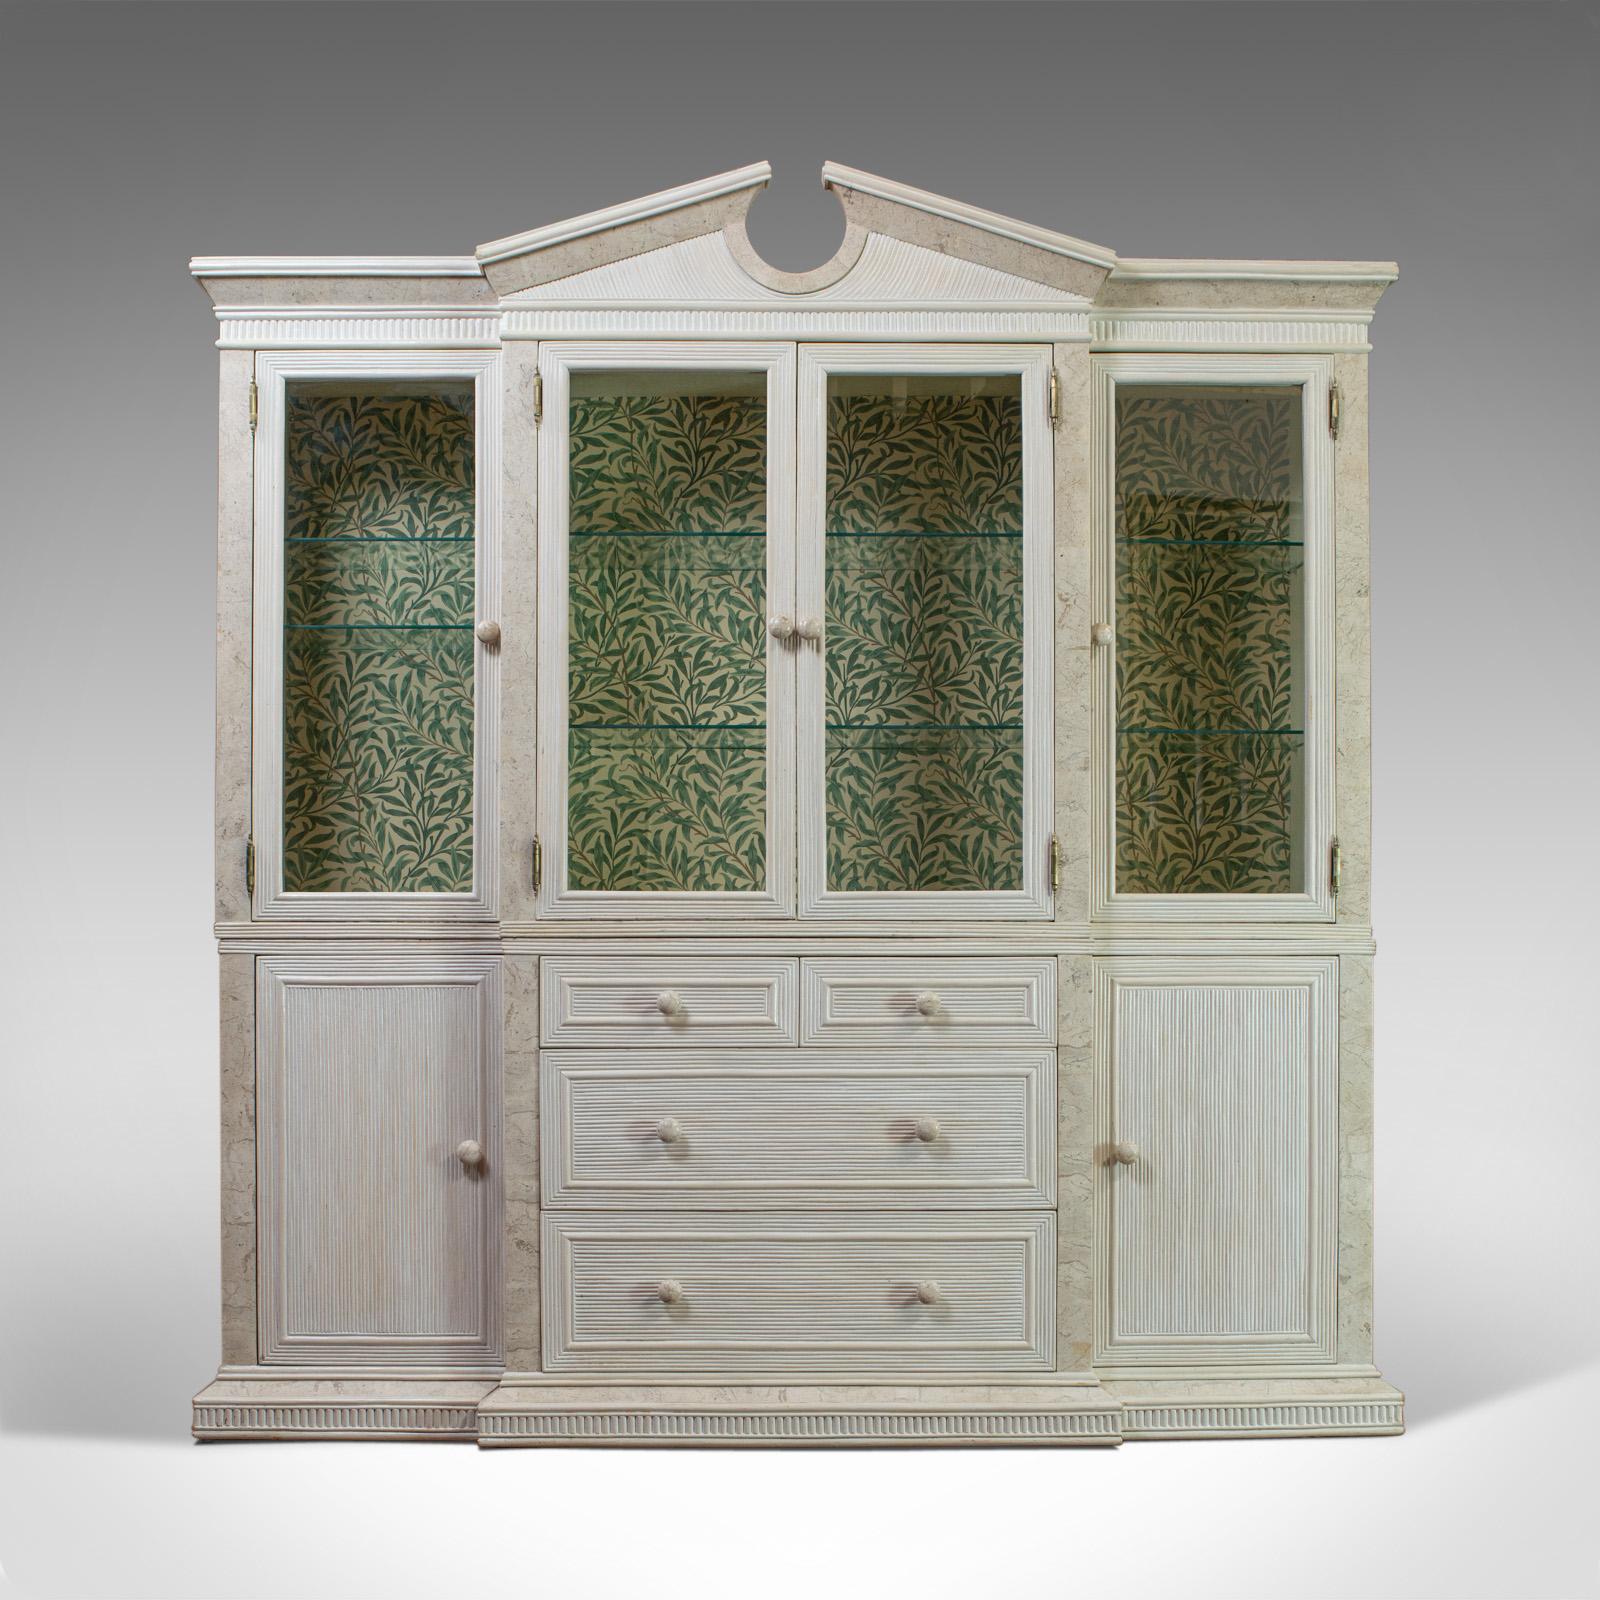 Classical Roman Vintage Display Cabinet, English, Beech, Travertine, Breakfront, Classical